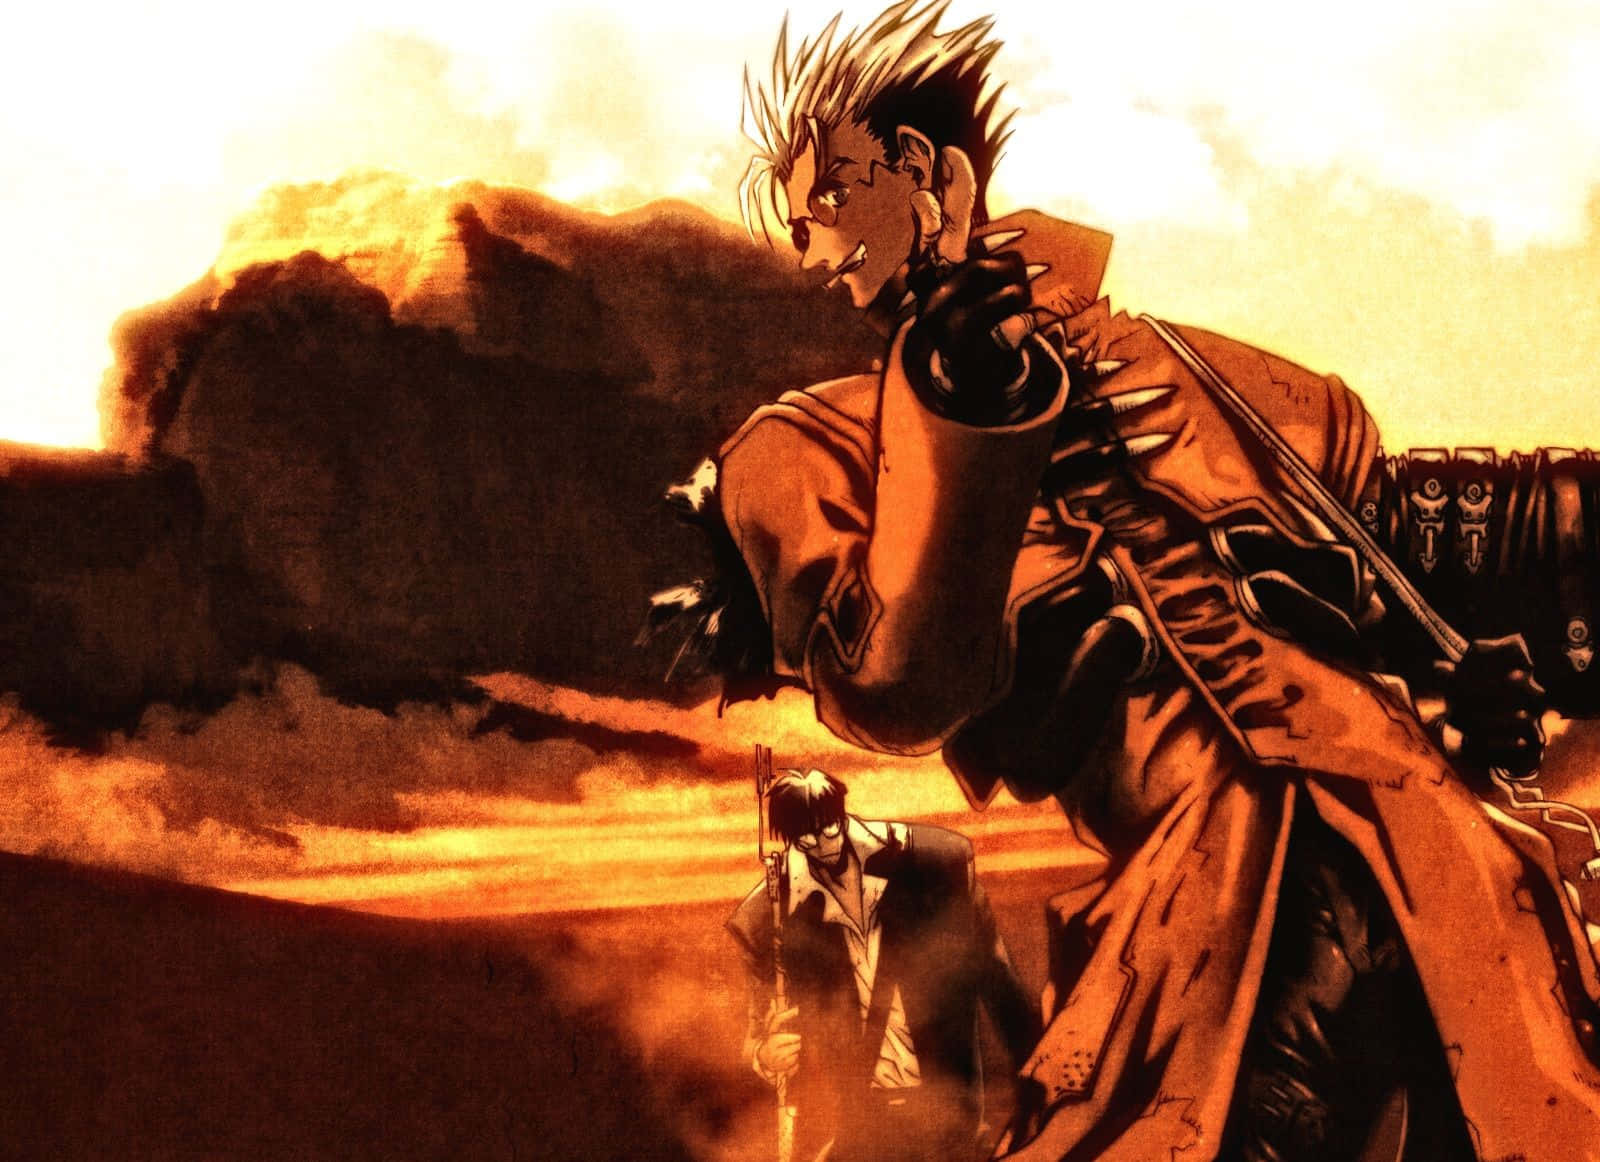 Vash The Stampede Sets Out on His Adventure